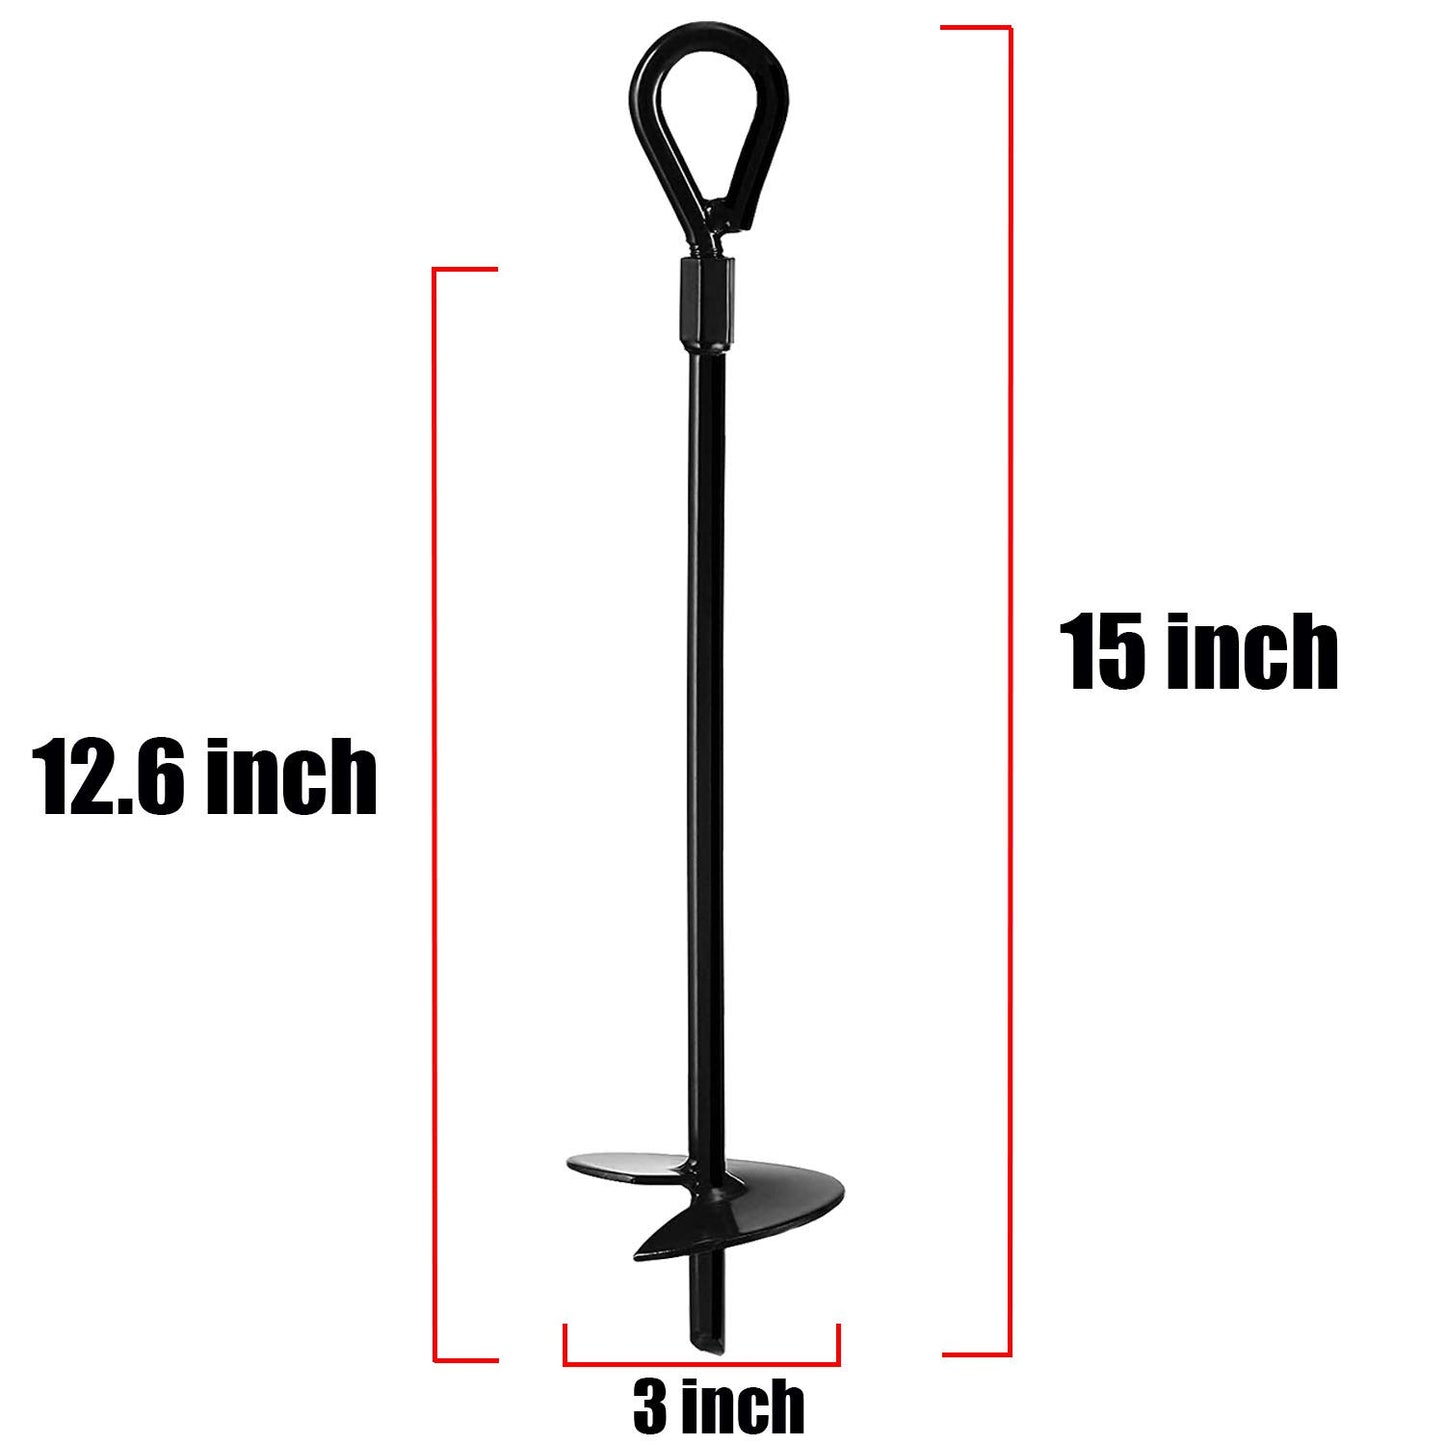 Earth Ground Anchor 15 Inch Heavy Duty Earth Augers Shelters, Canopies,Tents,Swing Sets,Trampoline，8 Pack,Adapter not Included